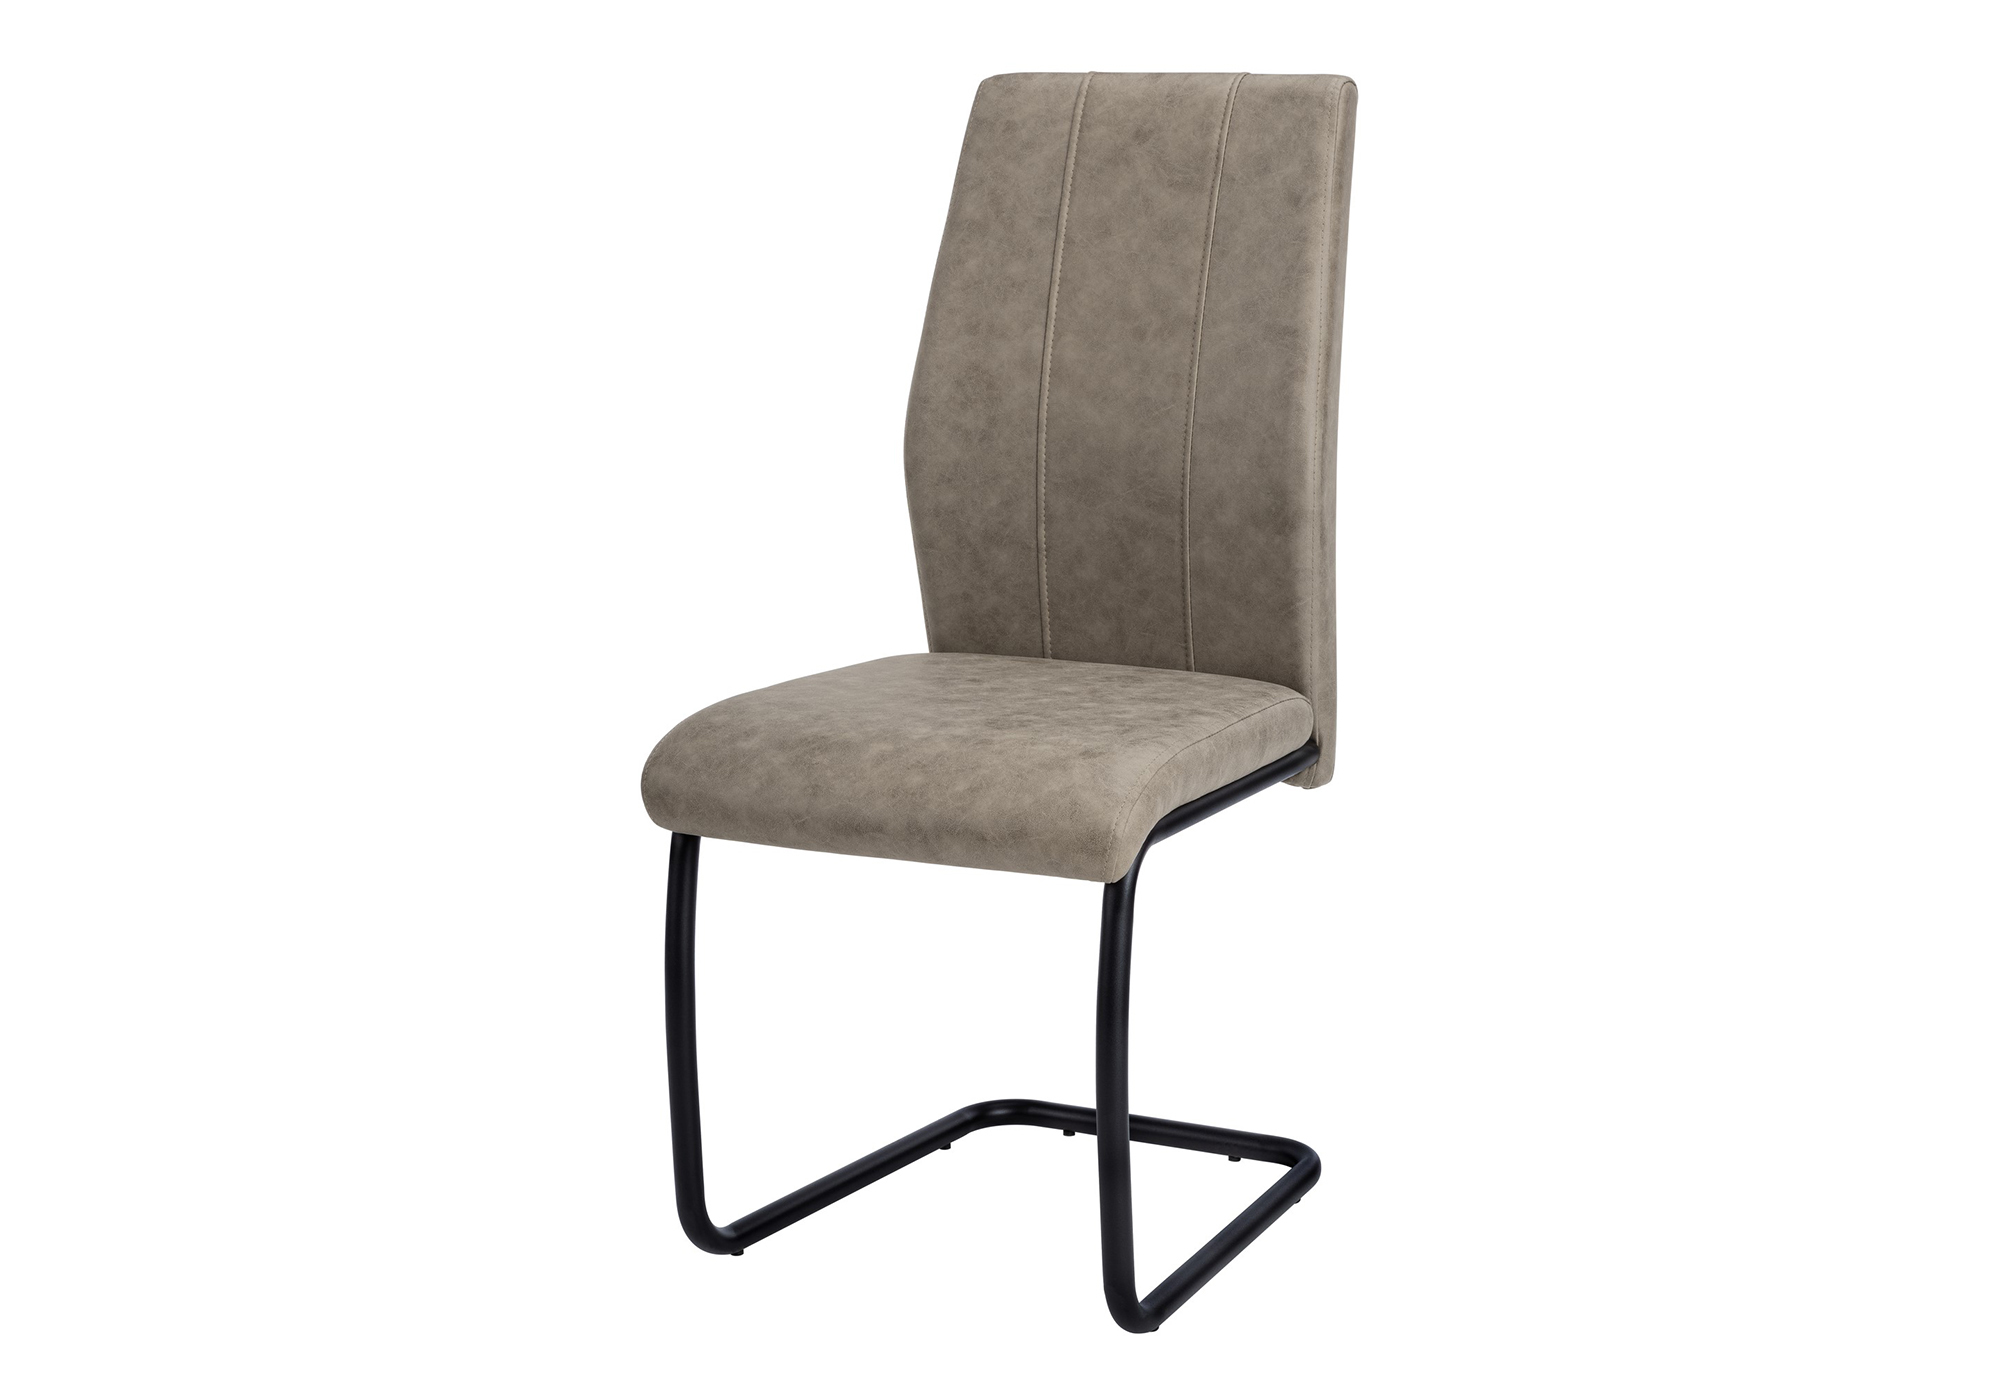 DINING CHAIR - 2PCS / 39"H / TAUPE FABRIC / BLACK METAL 